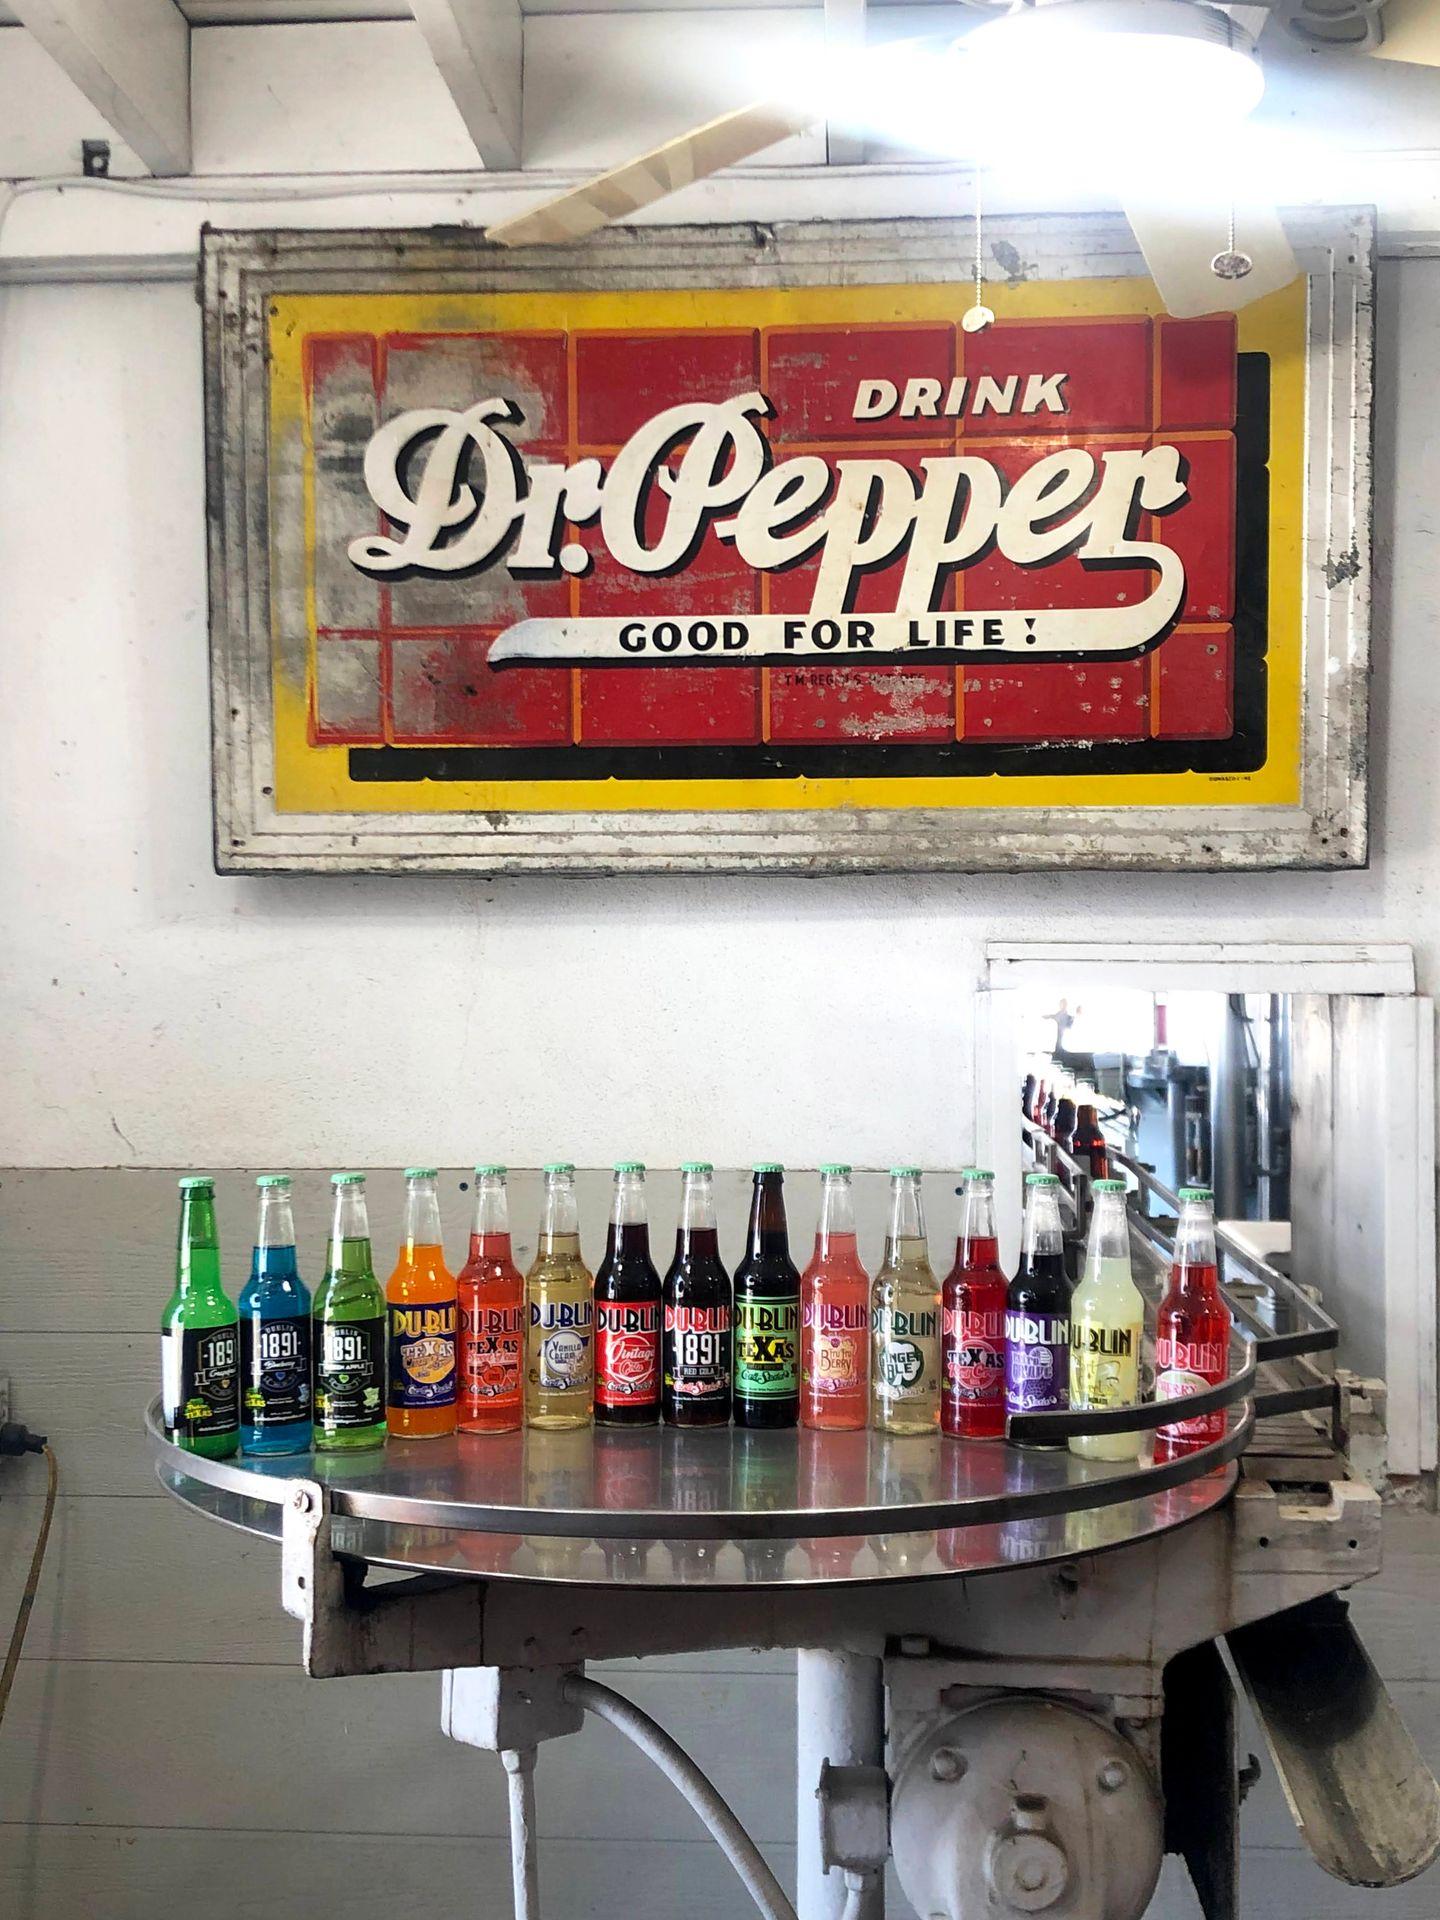 A sign reads "Drink Dr. Pepper: Good for Life" above a metal table that has all of the offerings for Dublin sodas.